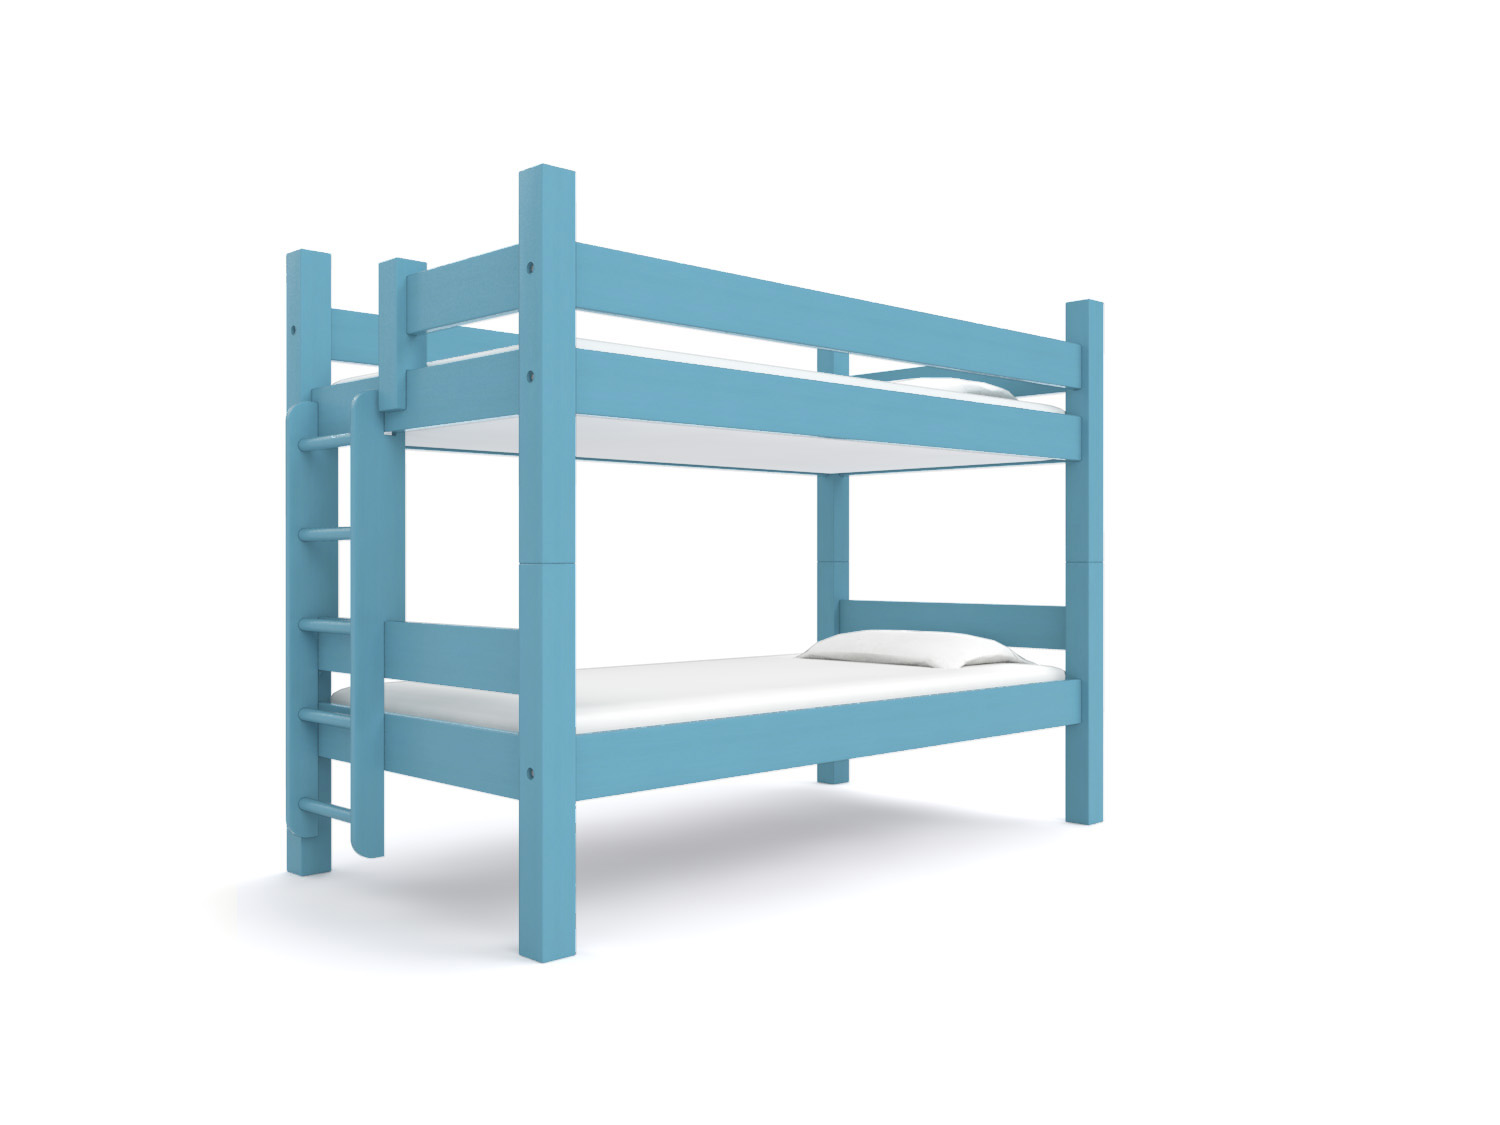 best twin over twin bunk beds